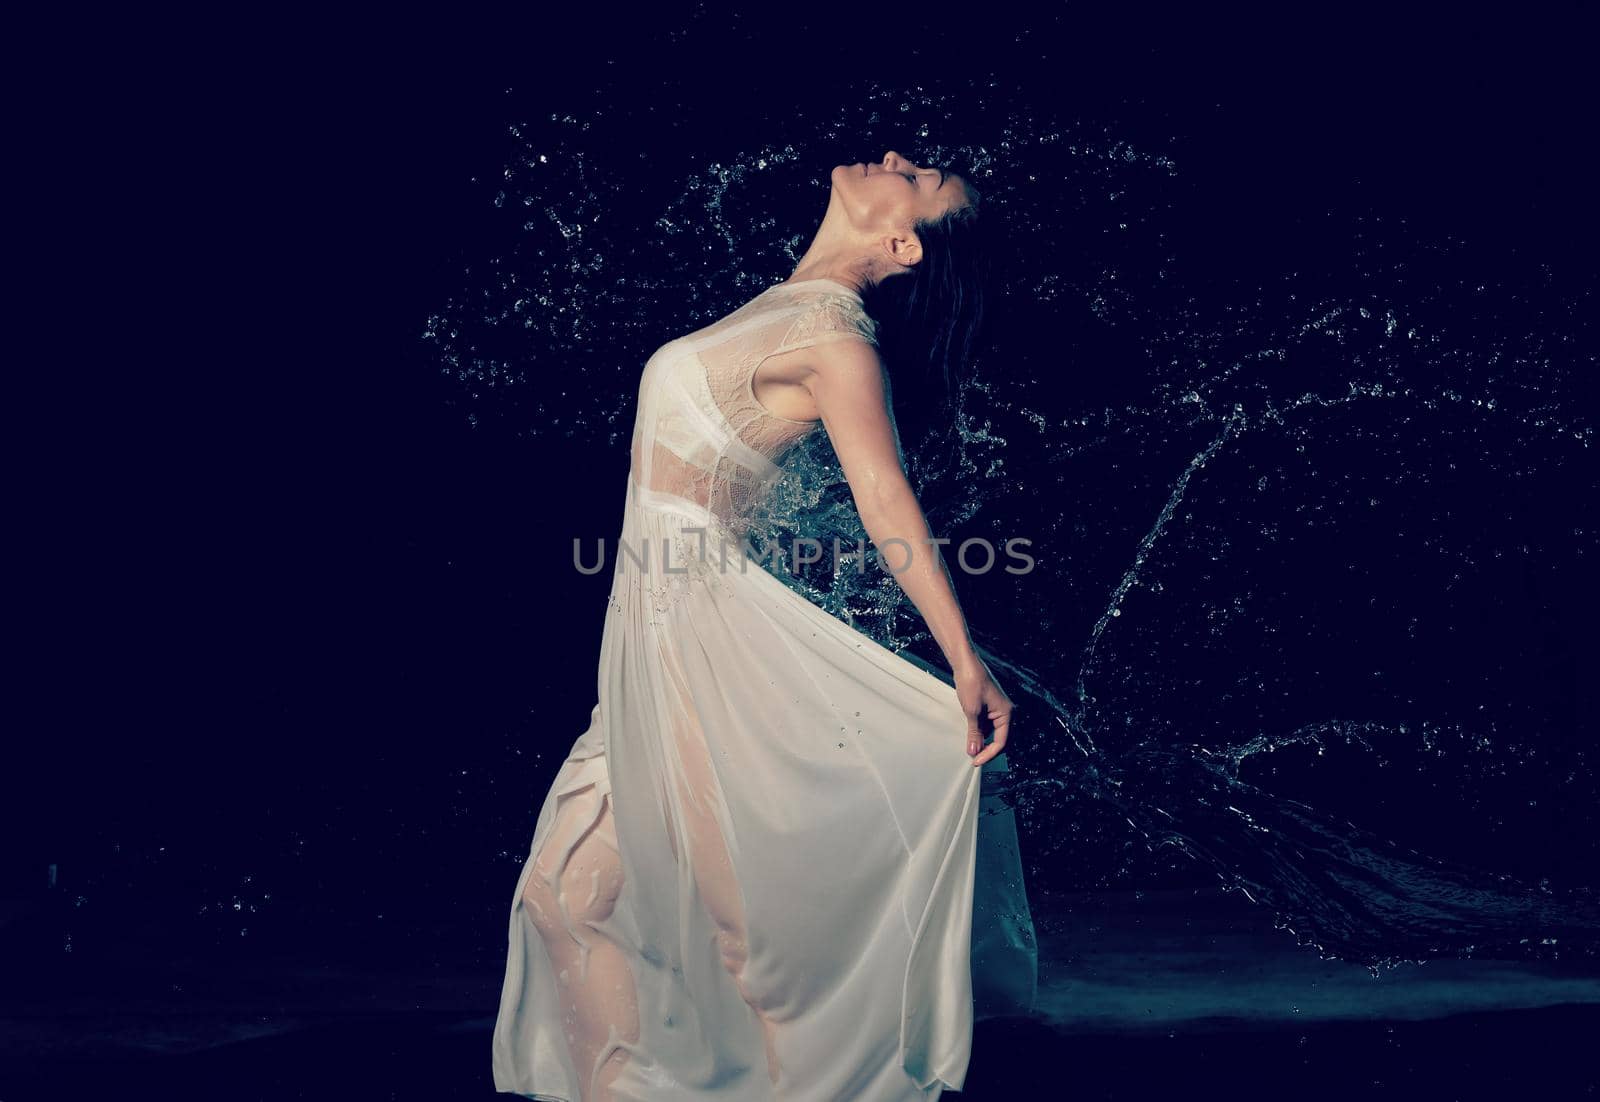 beautiful woman of Caucasian appearance with black hair dances in drops of water on a black background. The woman is wearing a white chiffon dress